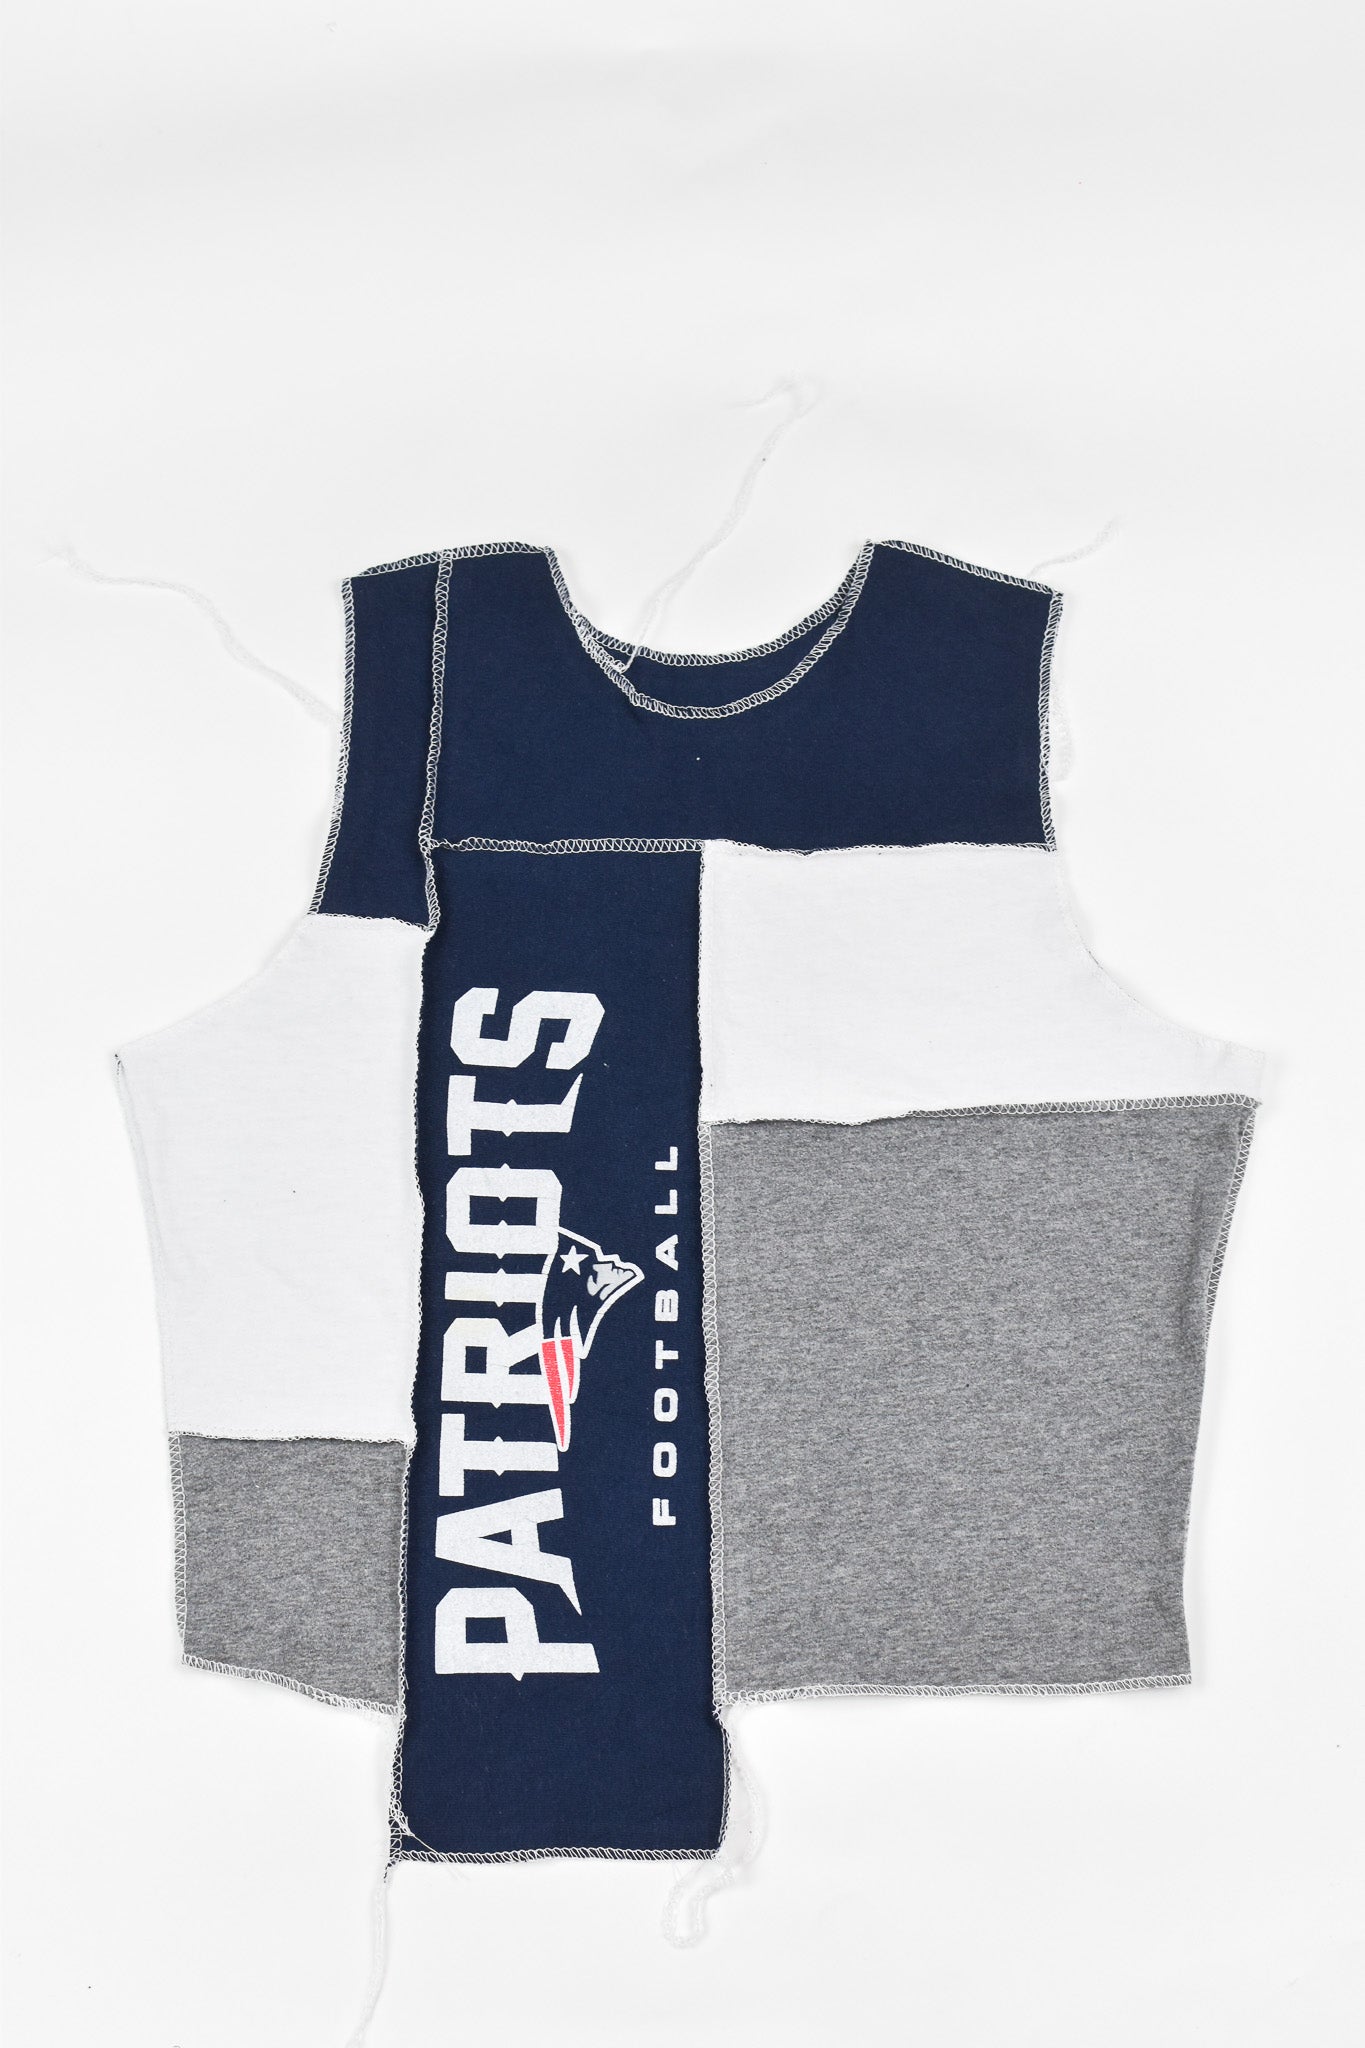 Upcycled New England Patriots Scrappy Tank Top